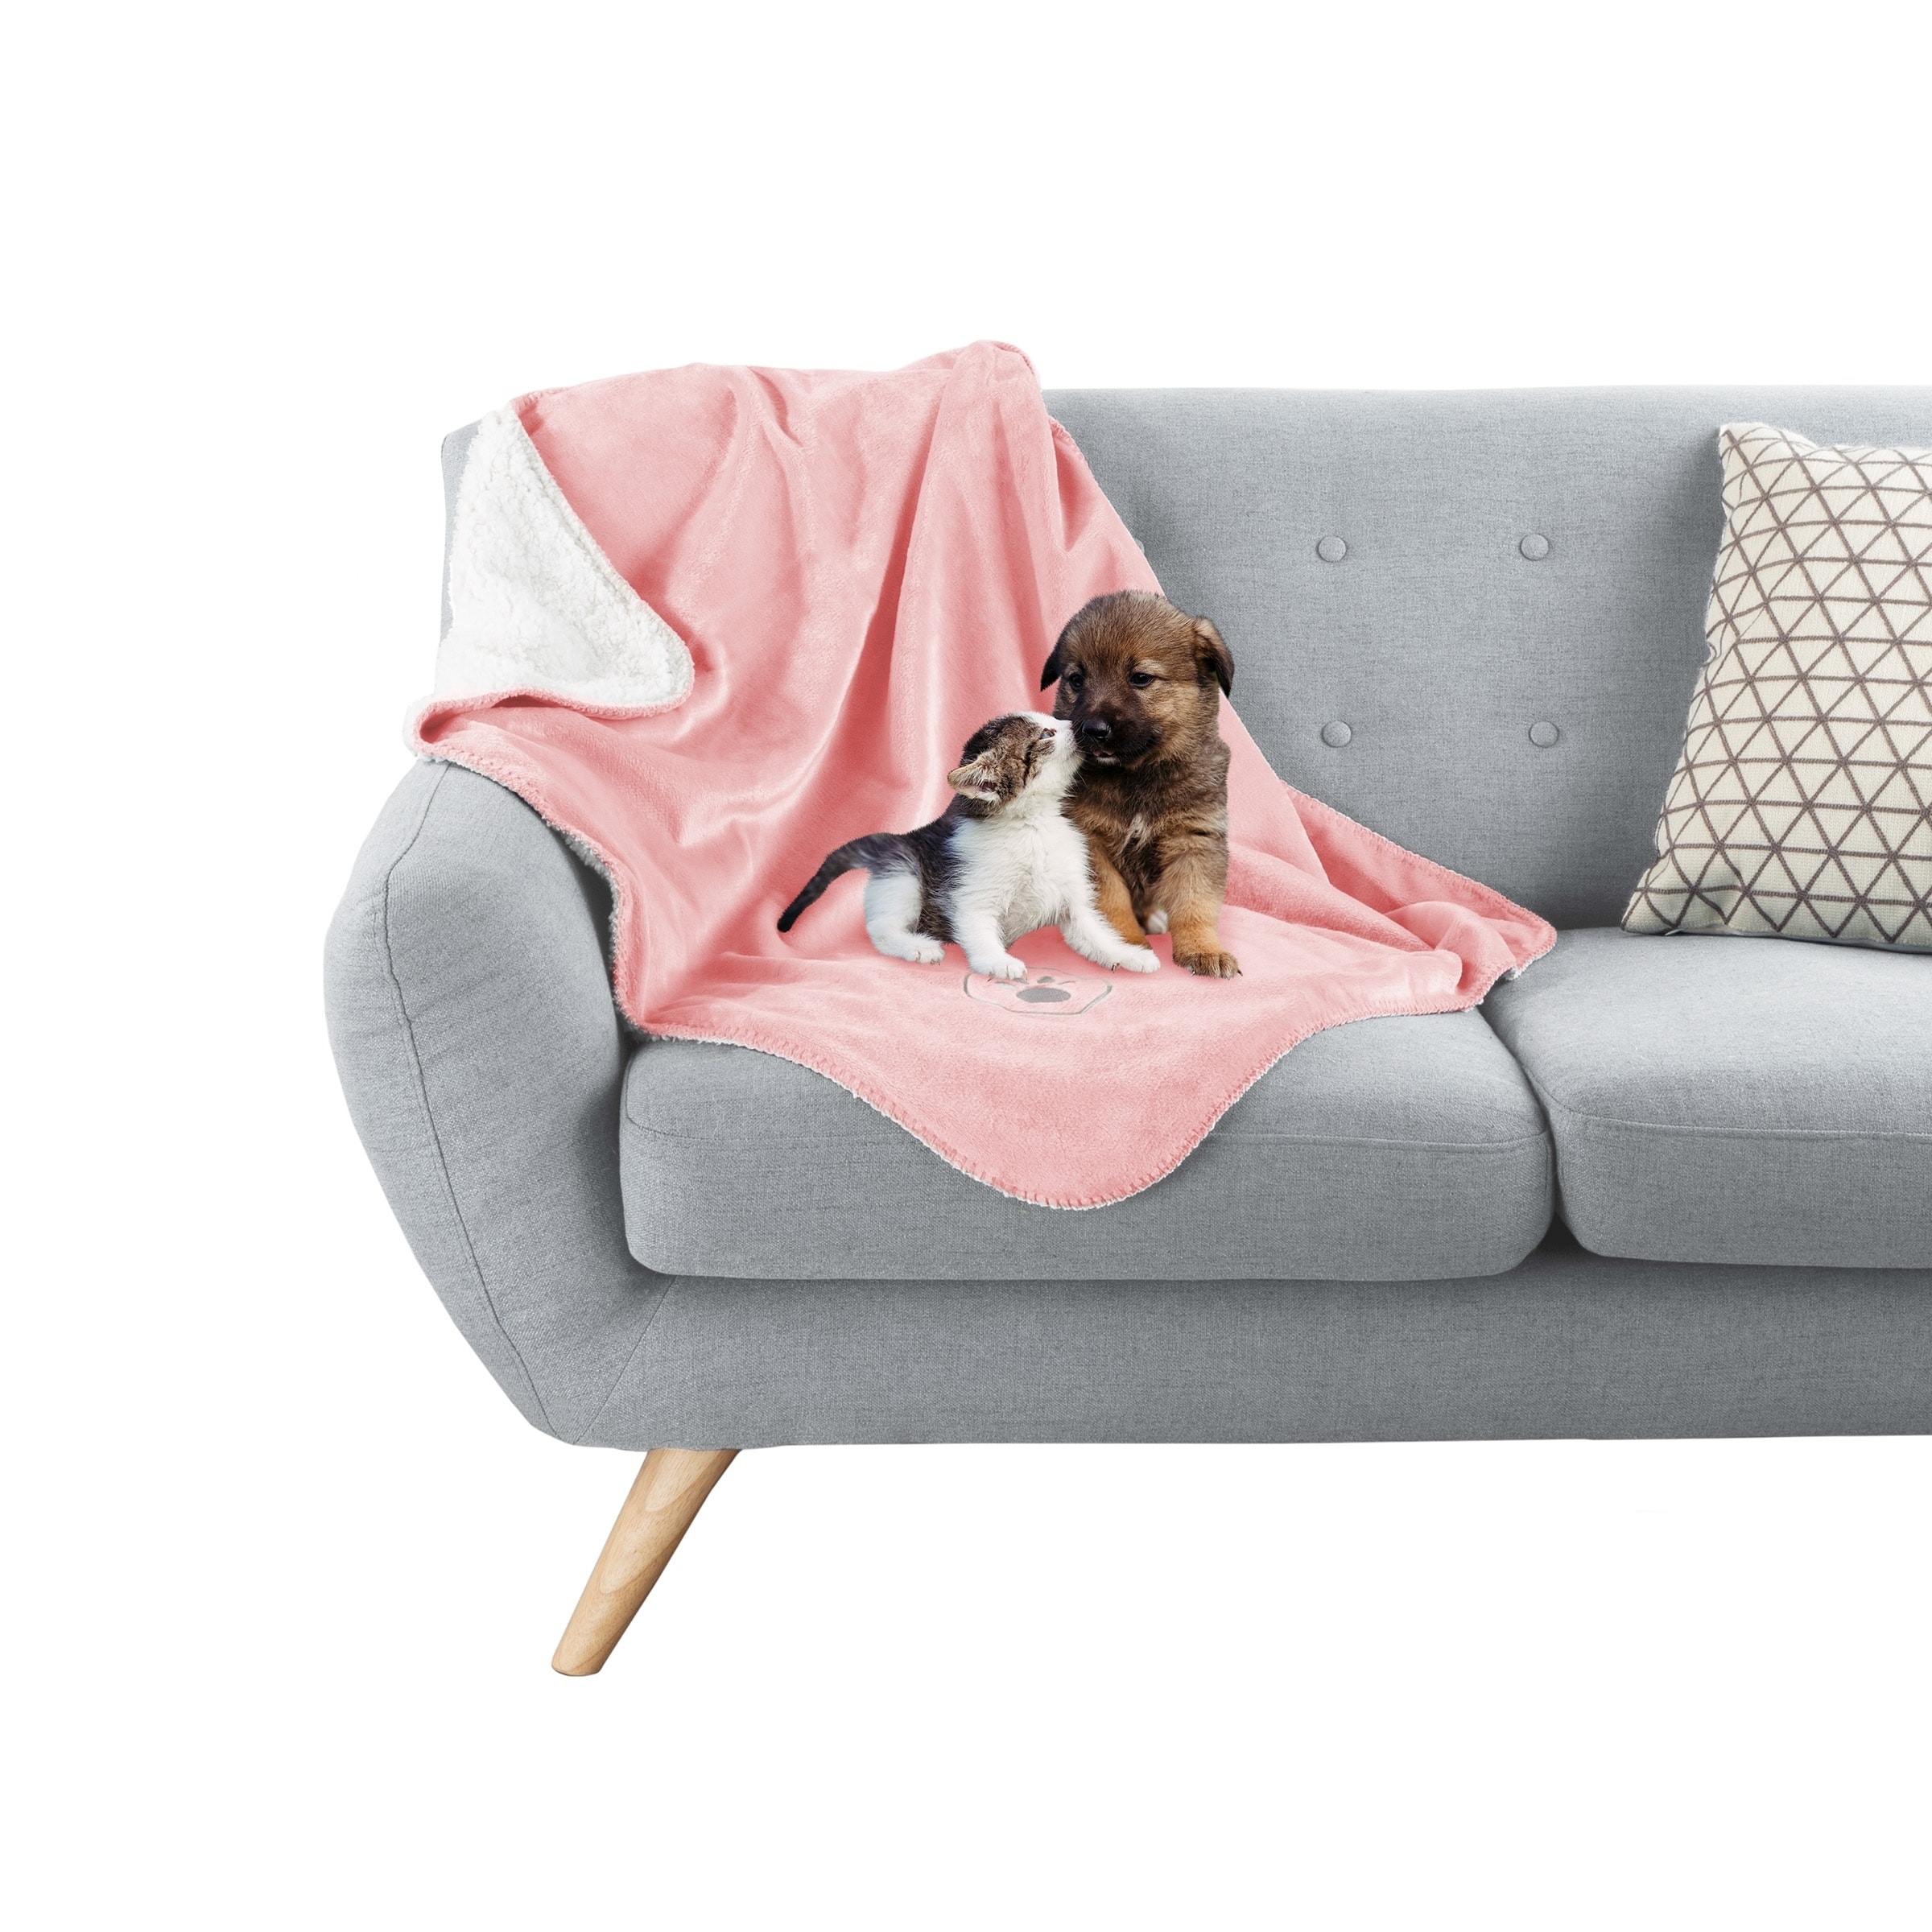 blankets to protect furniture from pets